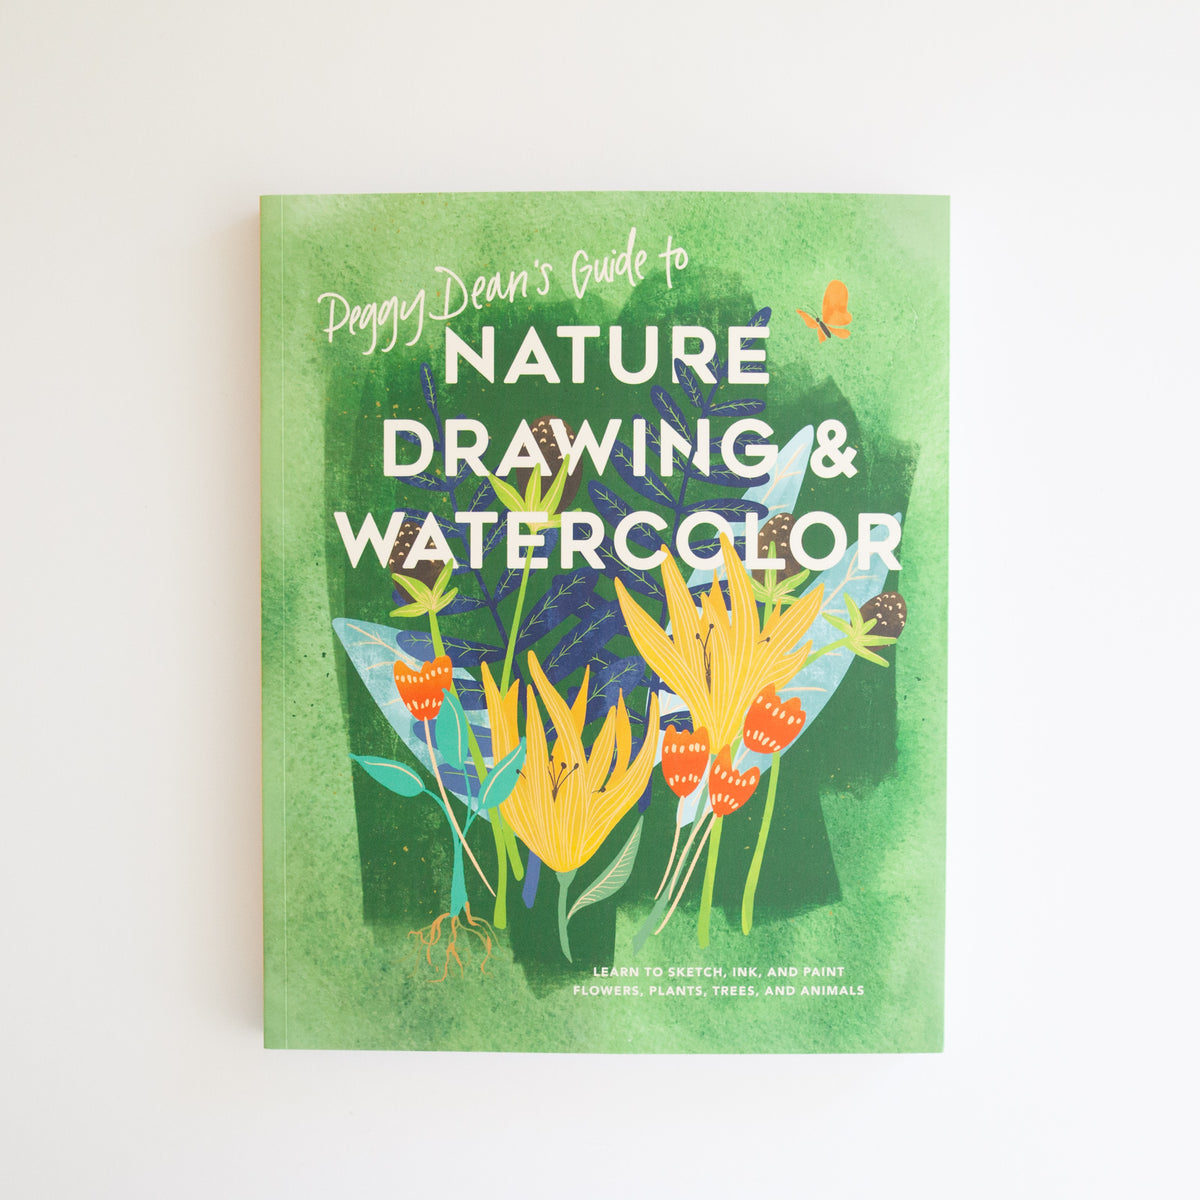 'Peggy Deans Guide to Nature Drawing' by Peggy Deans